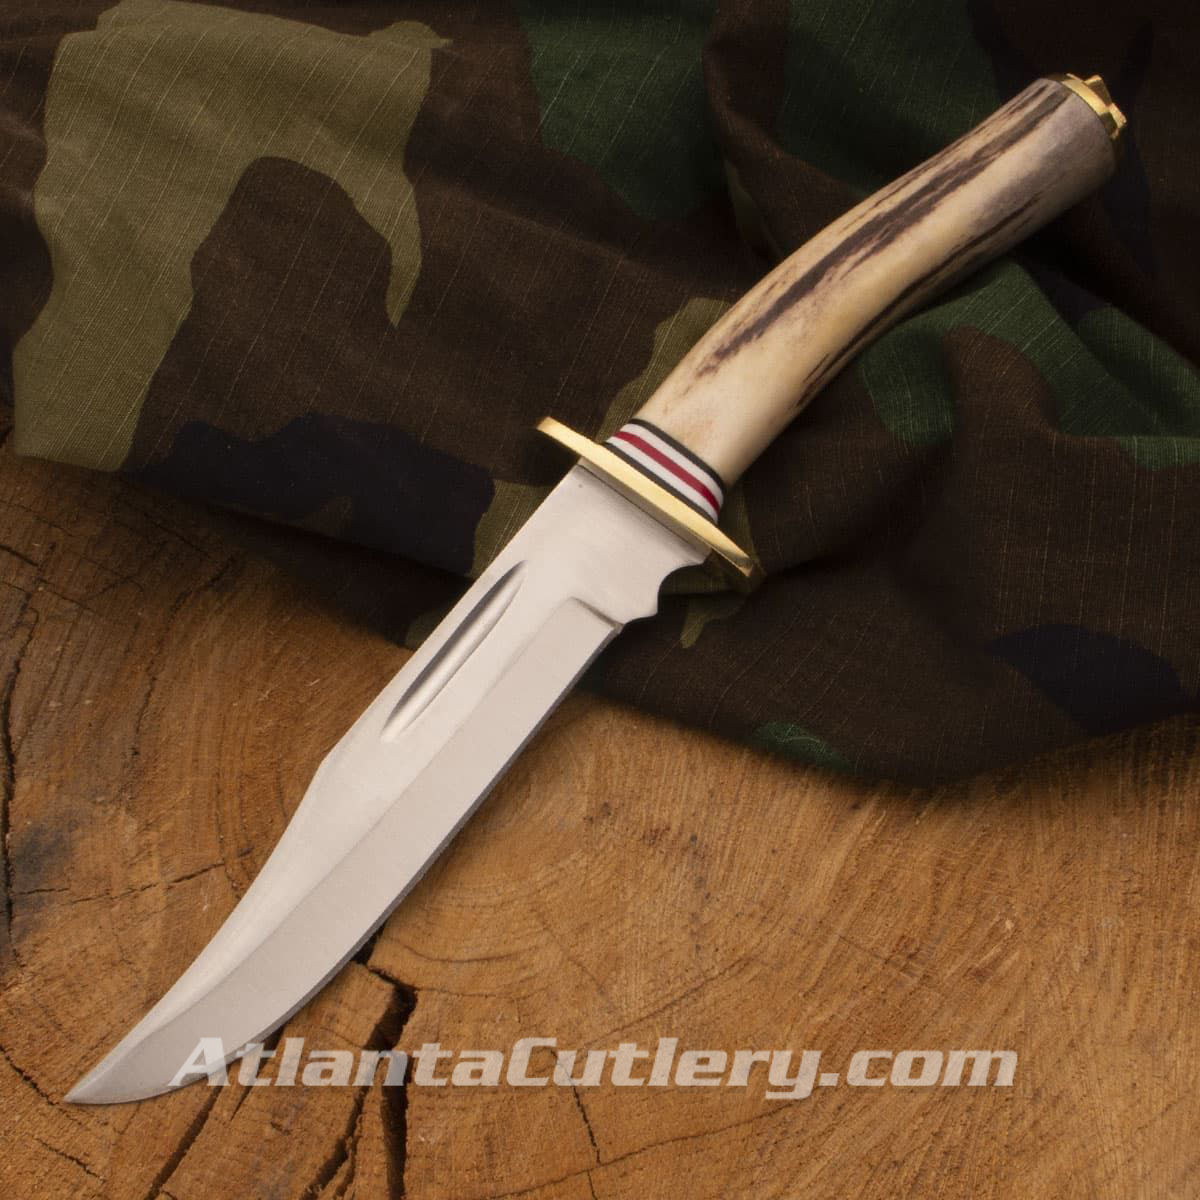 El Dorado hunting knife has solid brass pommel and guard, stag handle with black, white, and red spacers, leather belt sheath